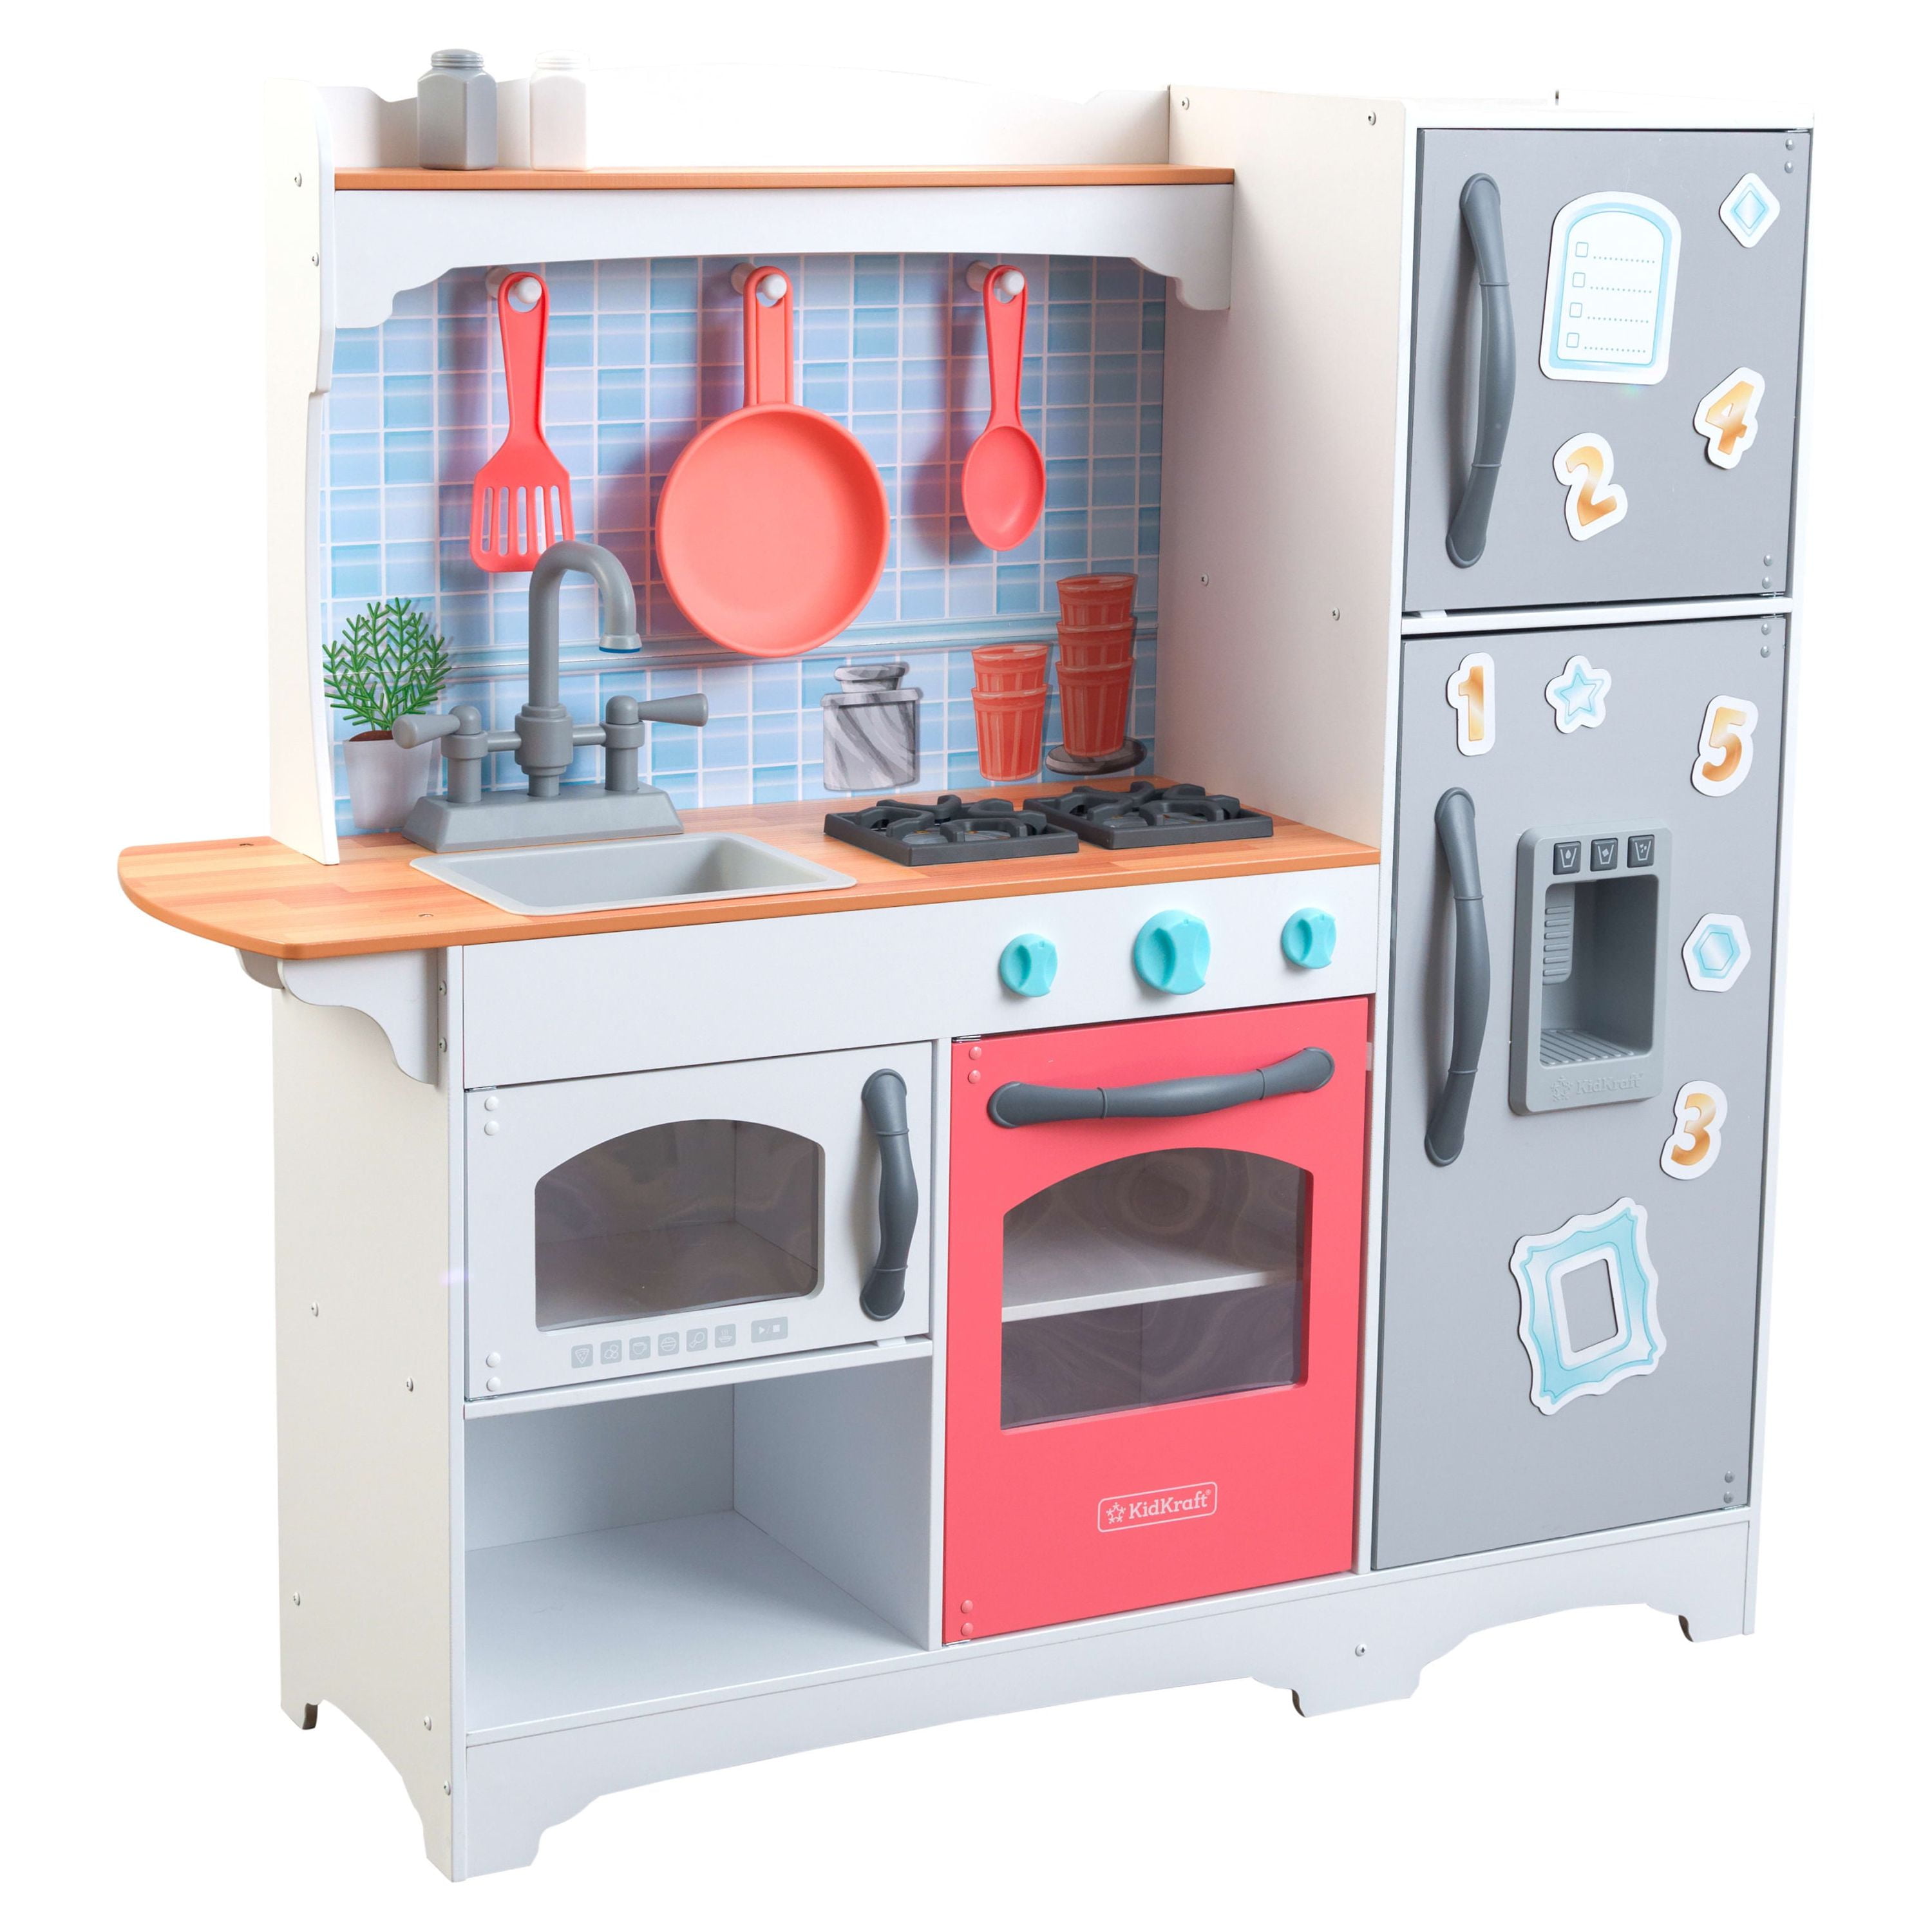 Oven / Stove Sticker / Decal for IKEA DUKTIG Play Kitchen 